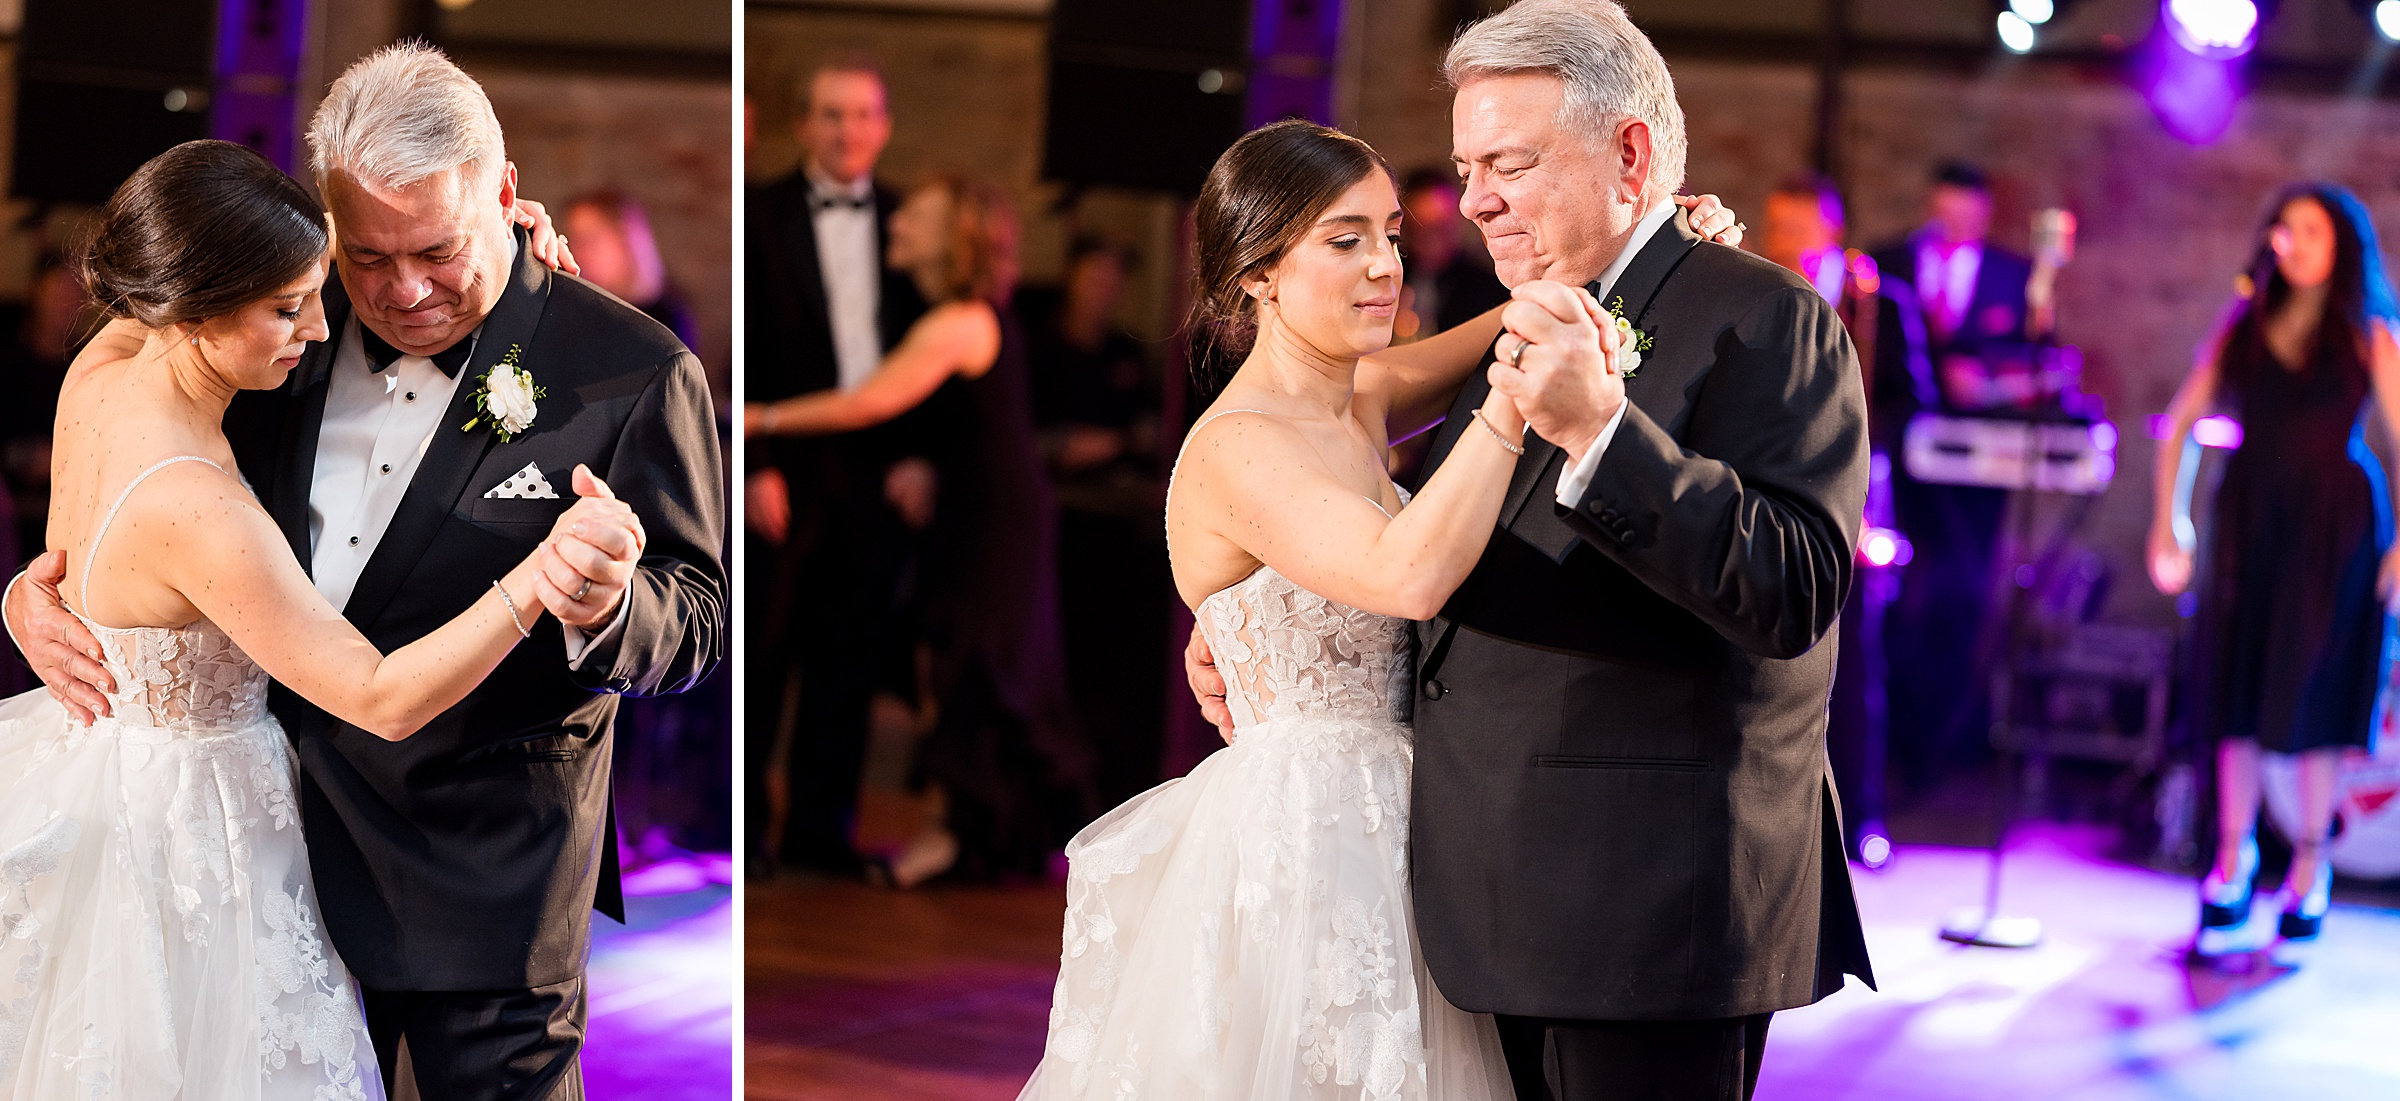 At the Lilah Events wedding, a bride and her father share a special dance at their reception.